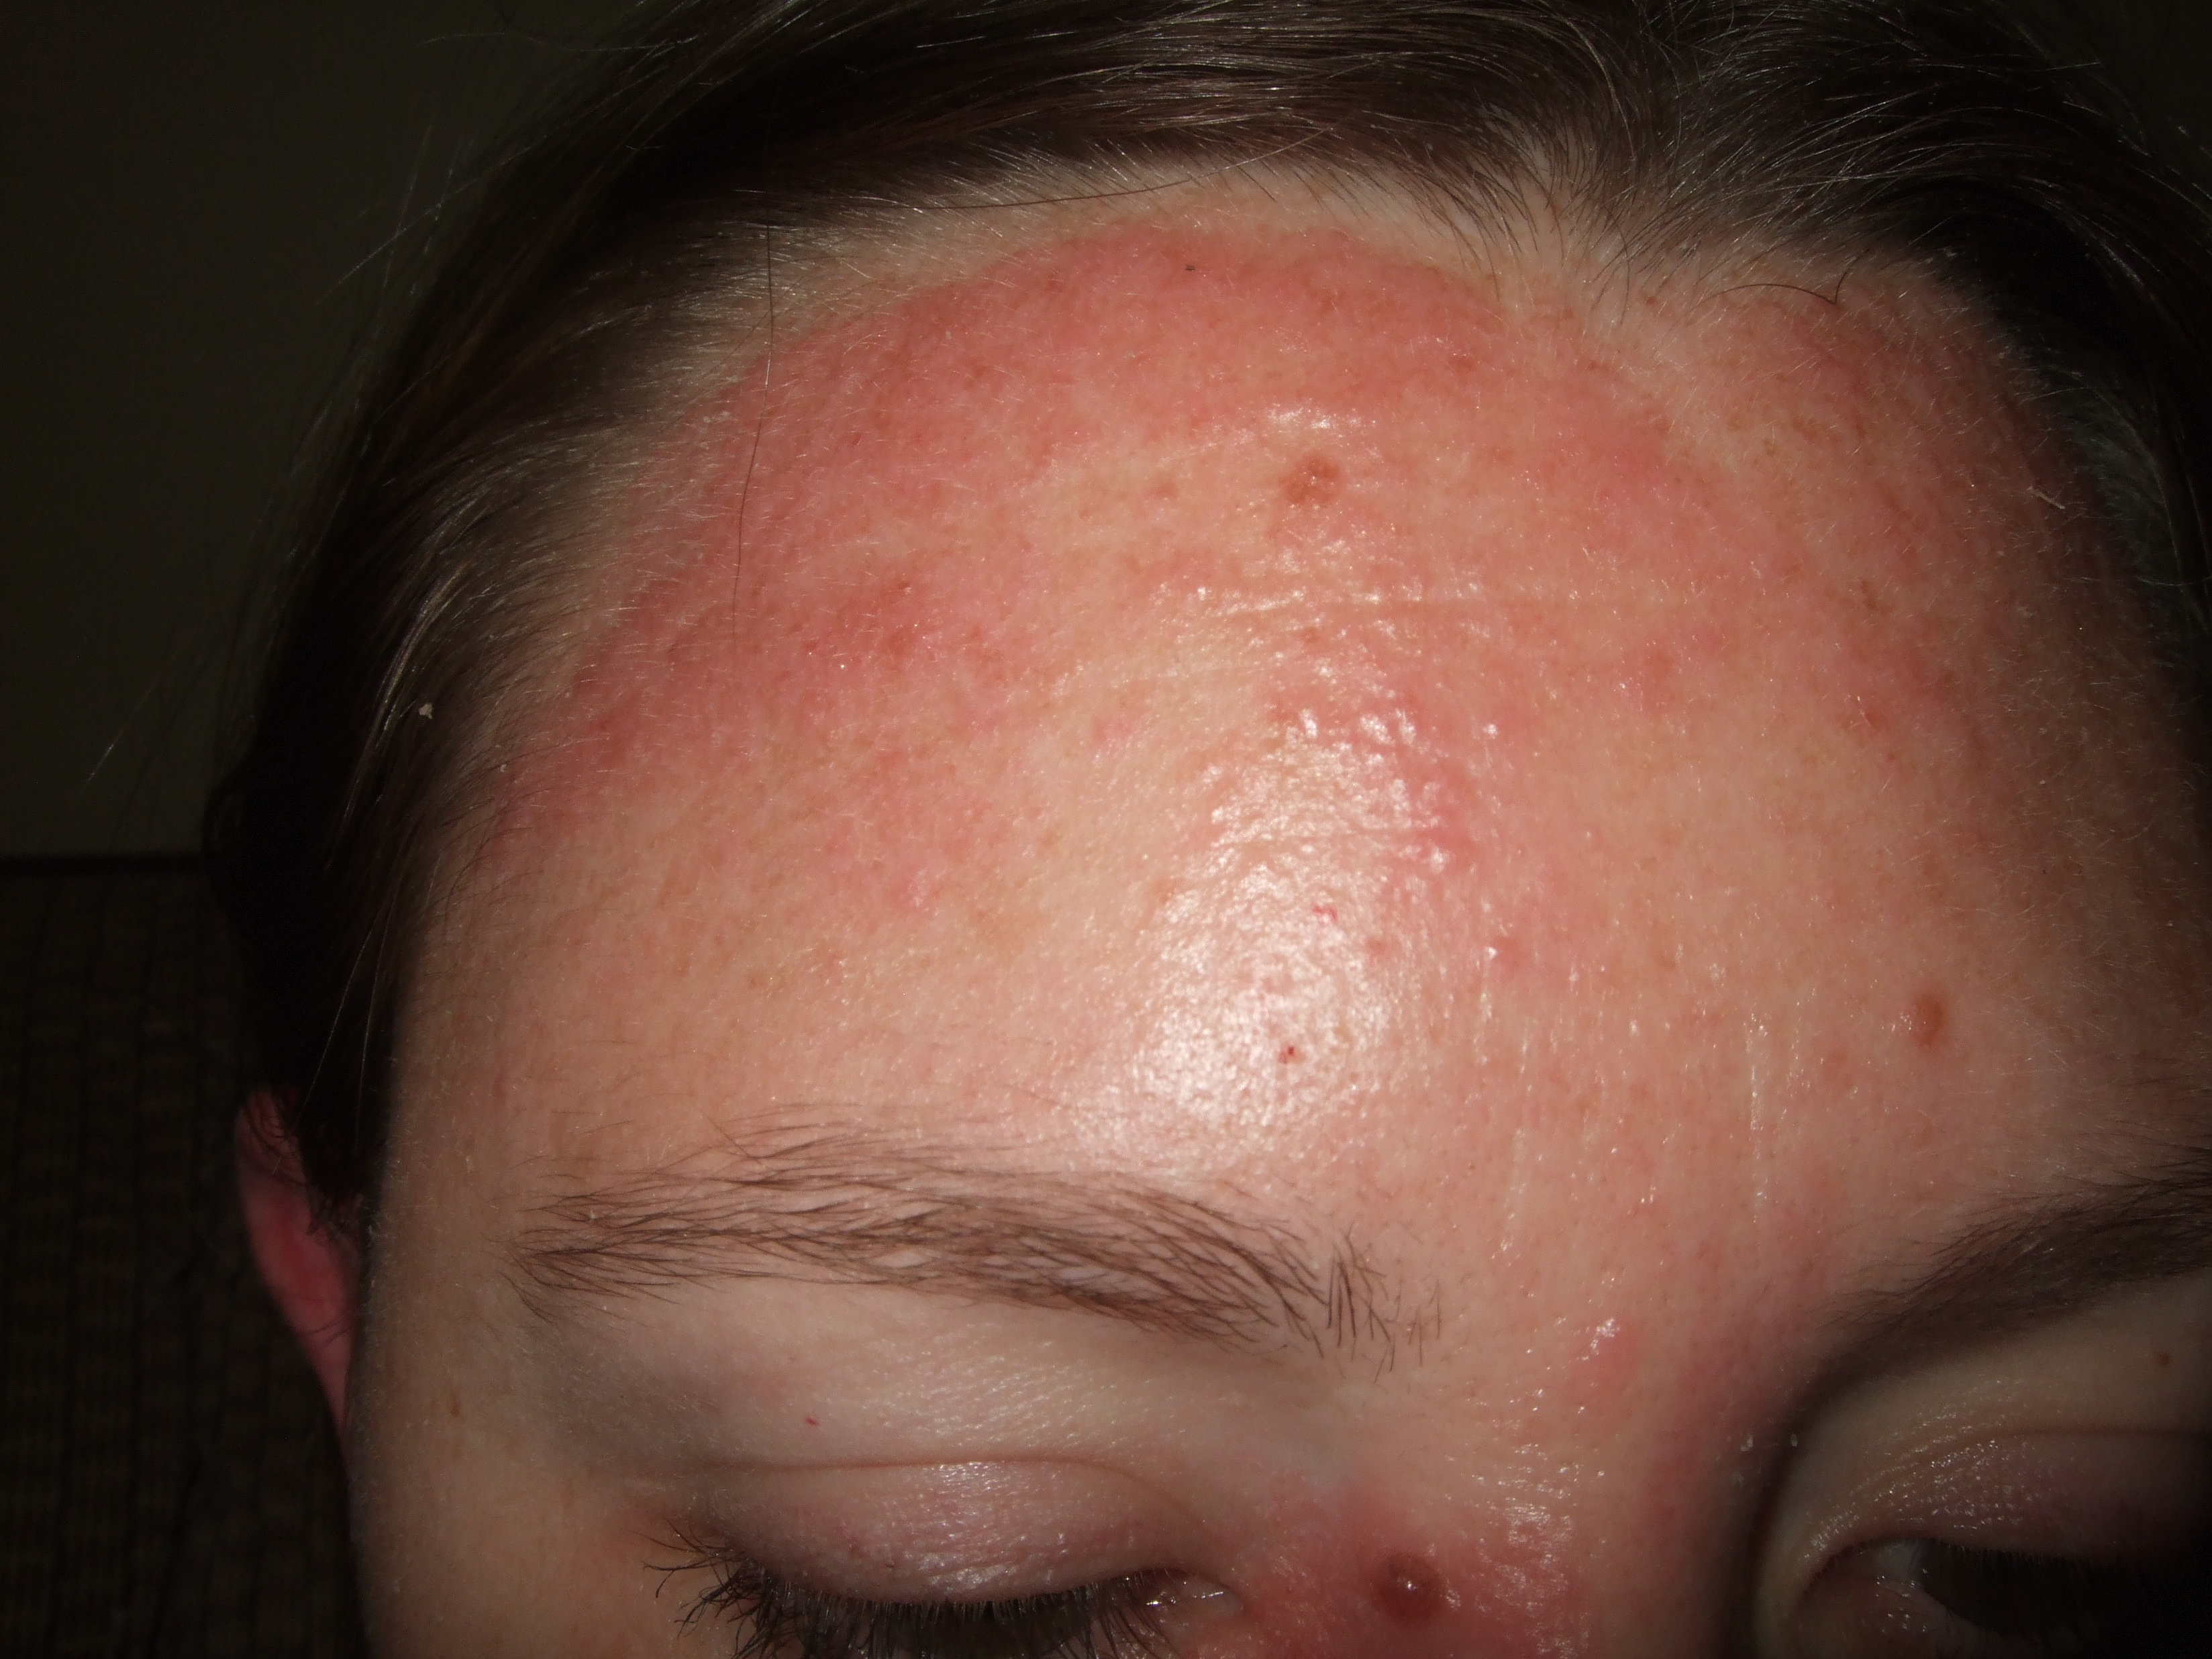 Hair loss and Skin rash: Common Related Medical Conditions